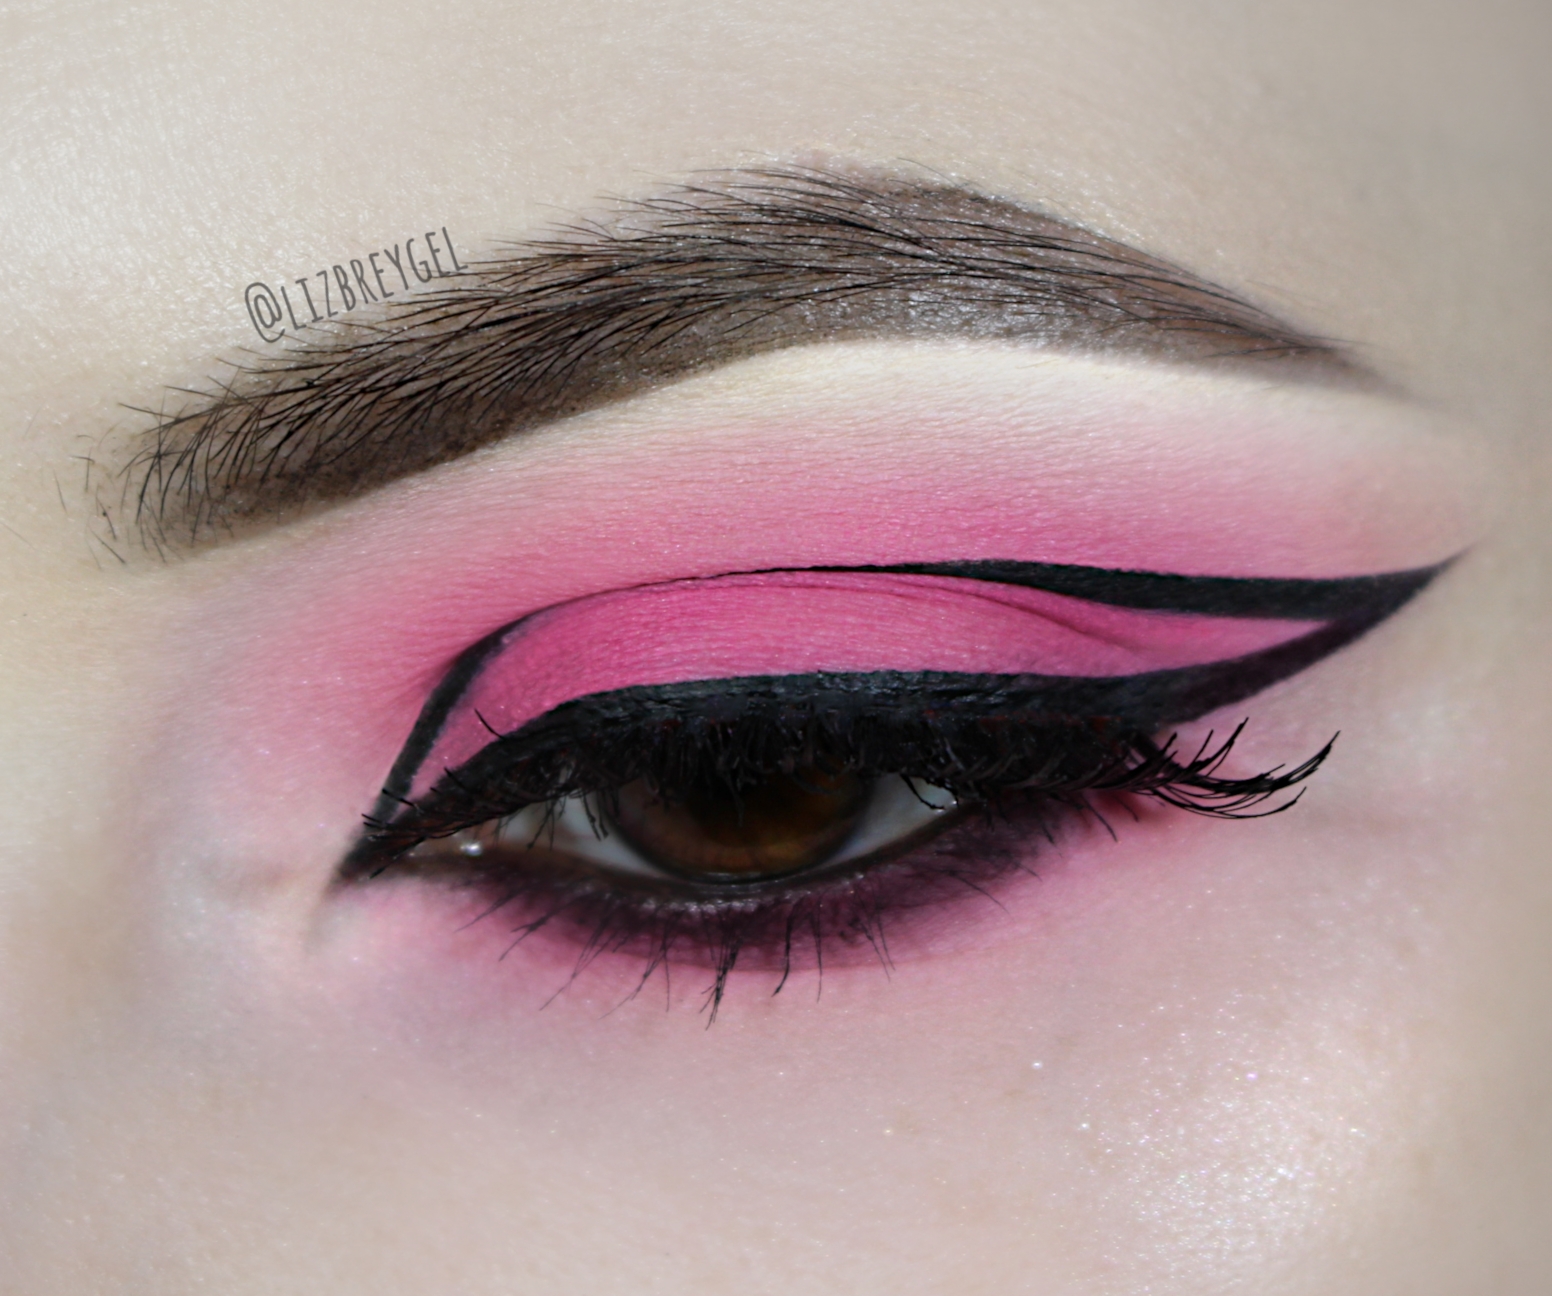 a close-up of a brown eye with a beautiful bubblegum pink eyeshadow and graphic eyeliner makeup look for Valentine's day